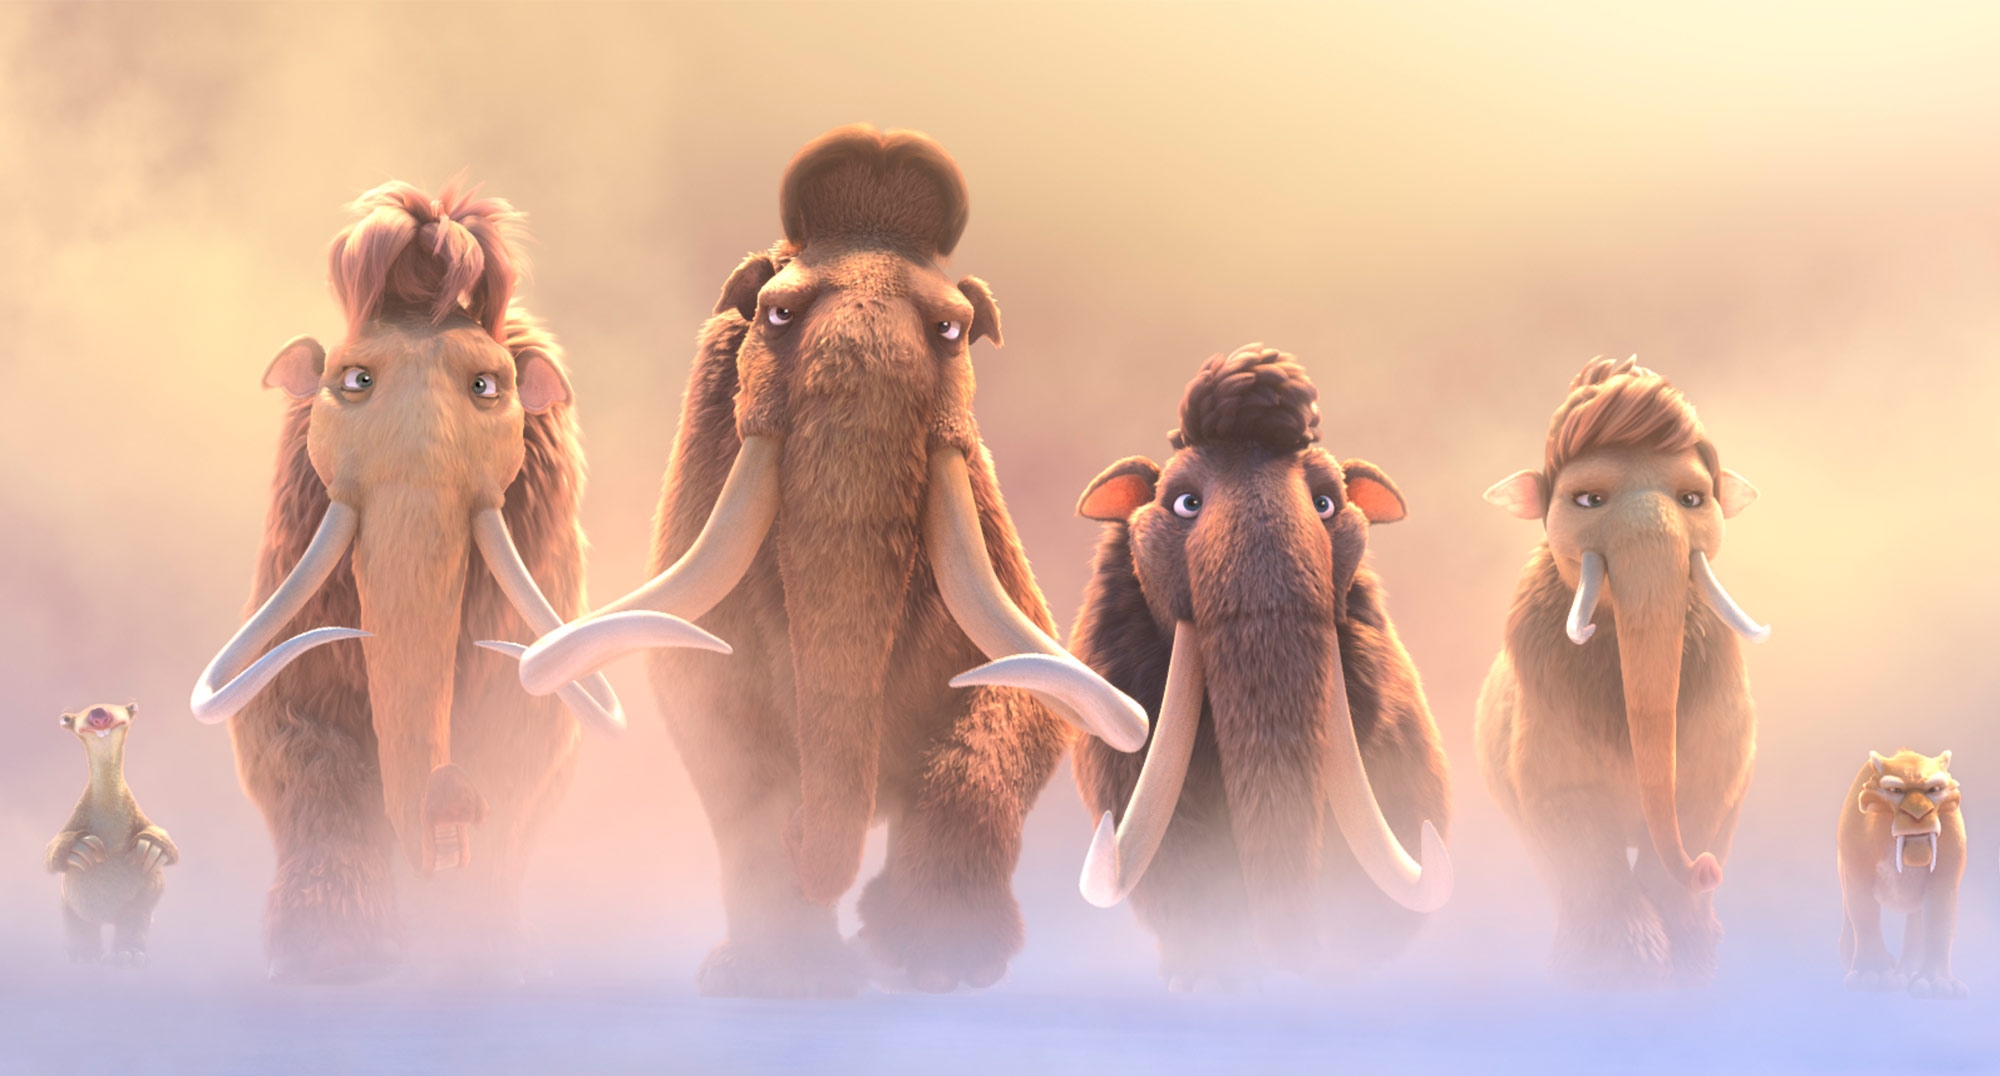 ice age 5 full movie download